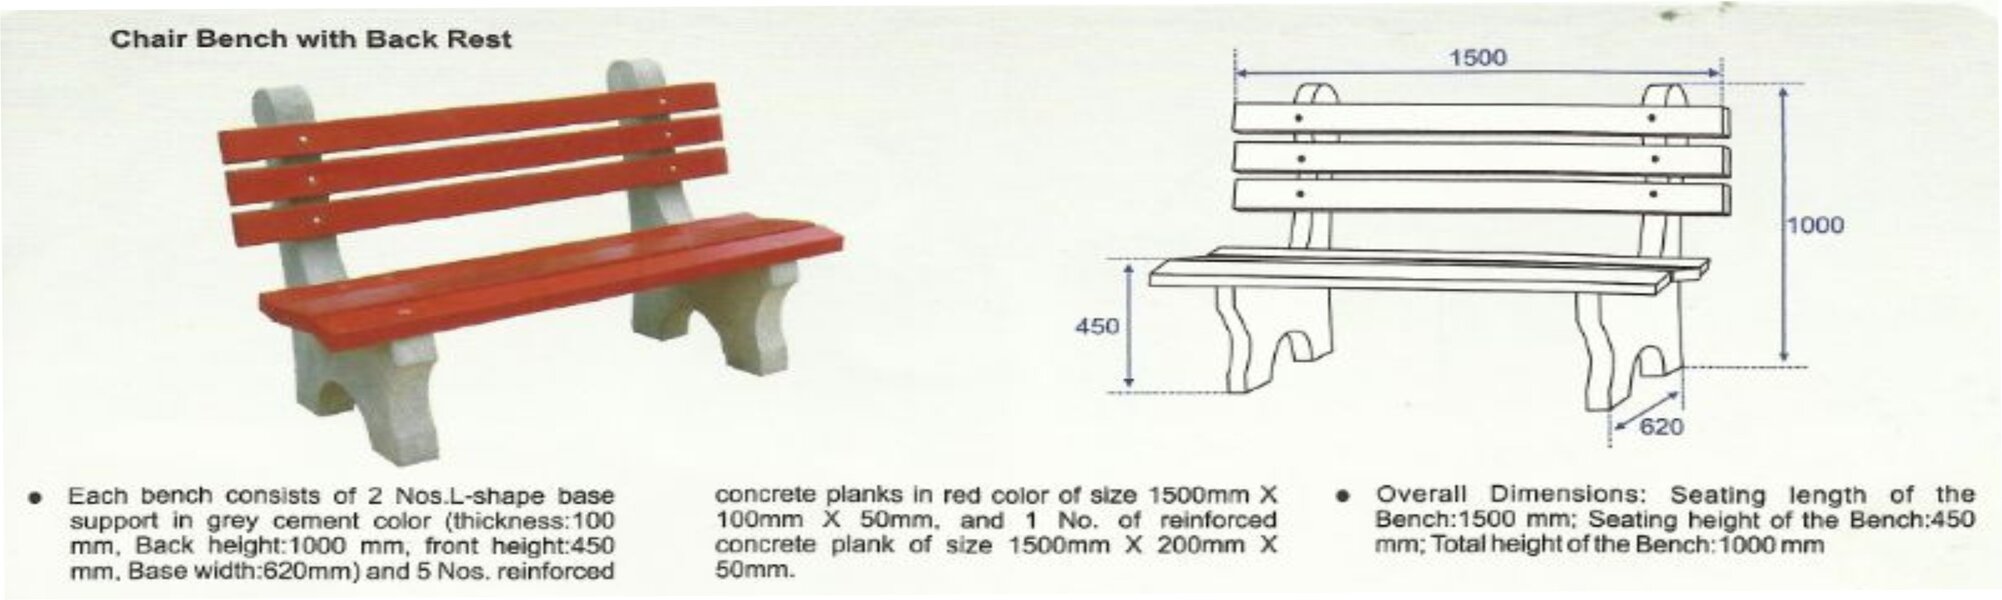 CHAIR BENCH WITH BACK REST WITH DETAILS .jpg